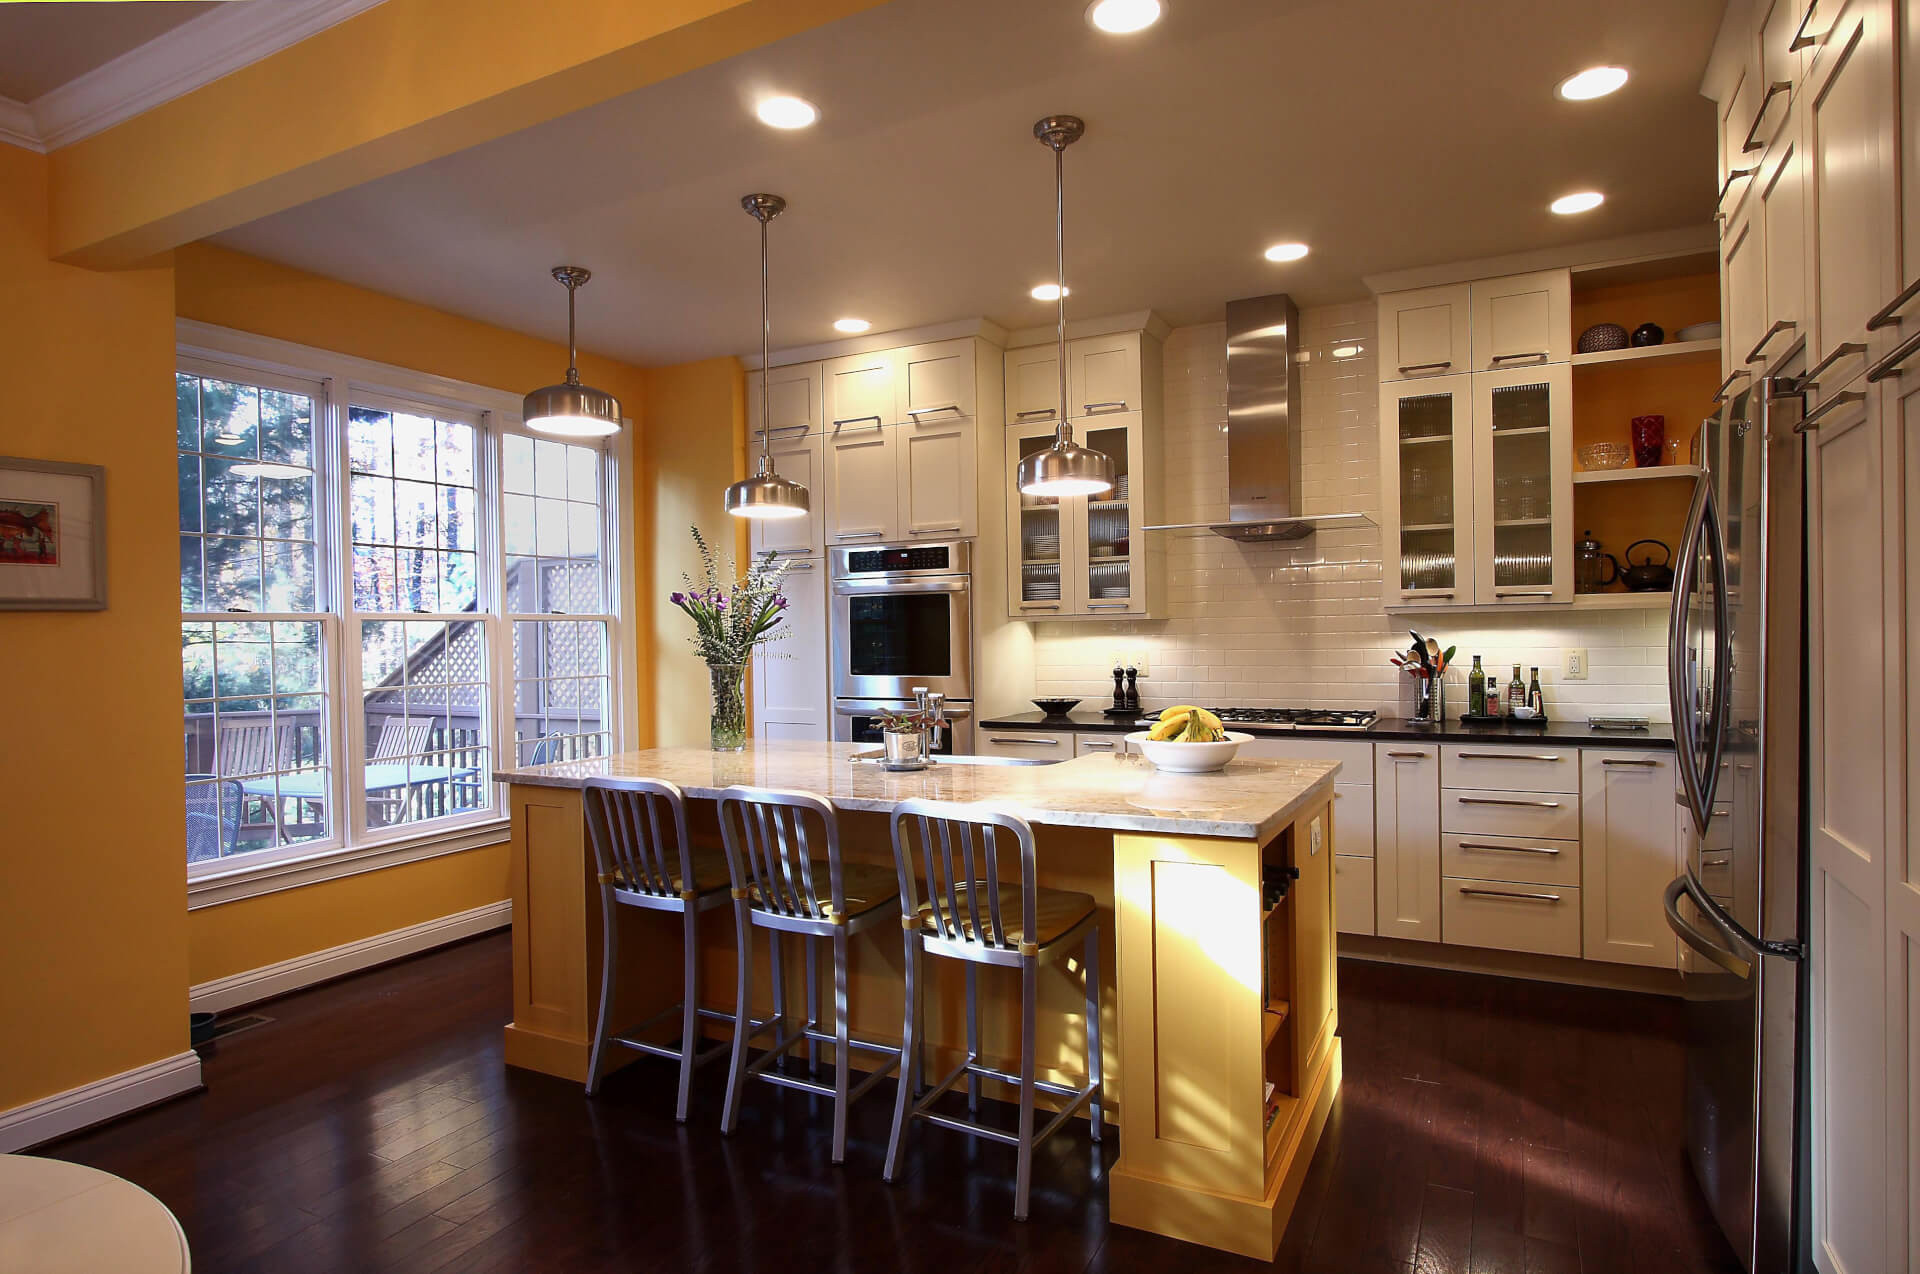 Color For Kitchen Walls
 Kitchen Colors How to choose what colors to paint your